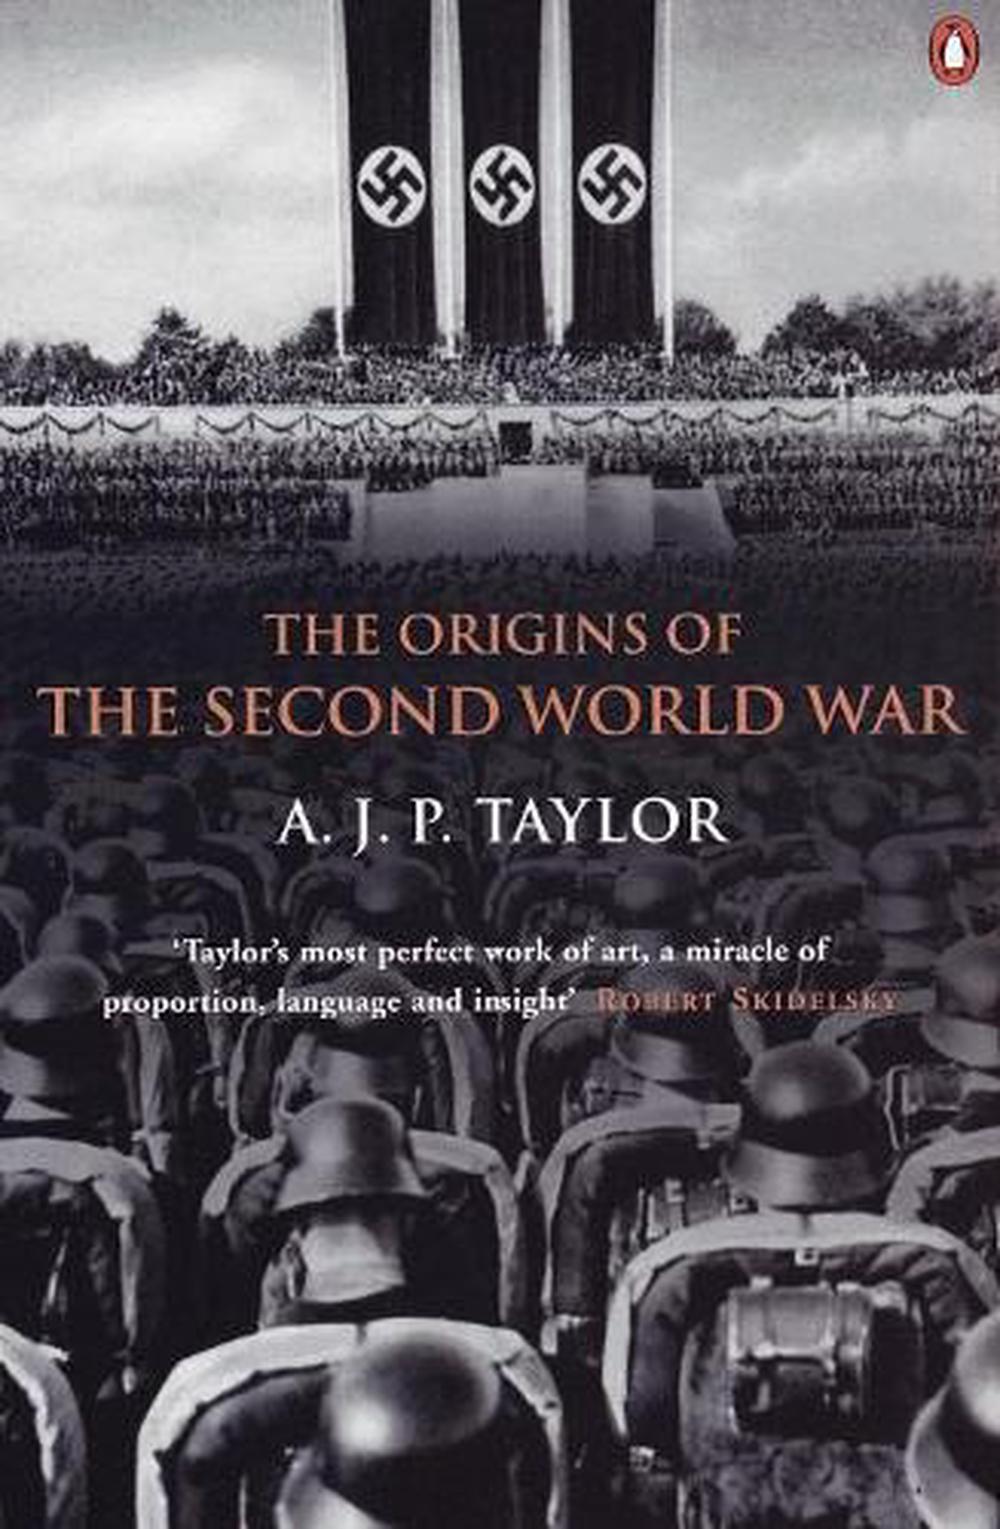 The Second World War download the new version for apple